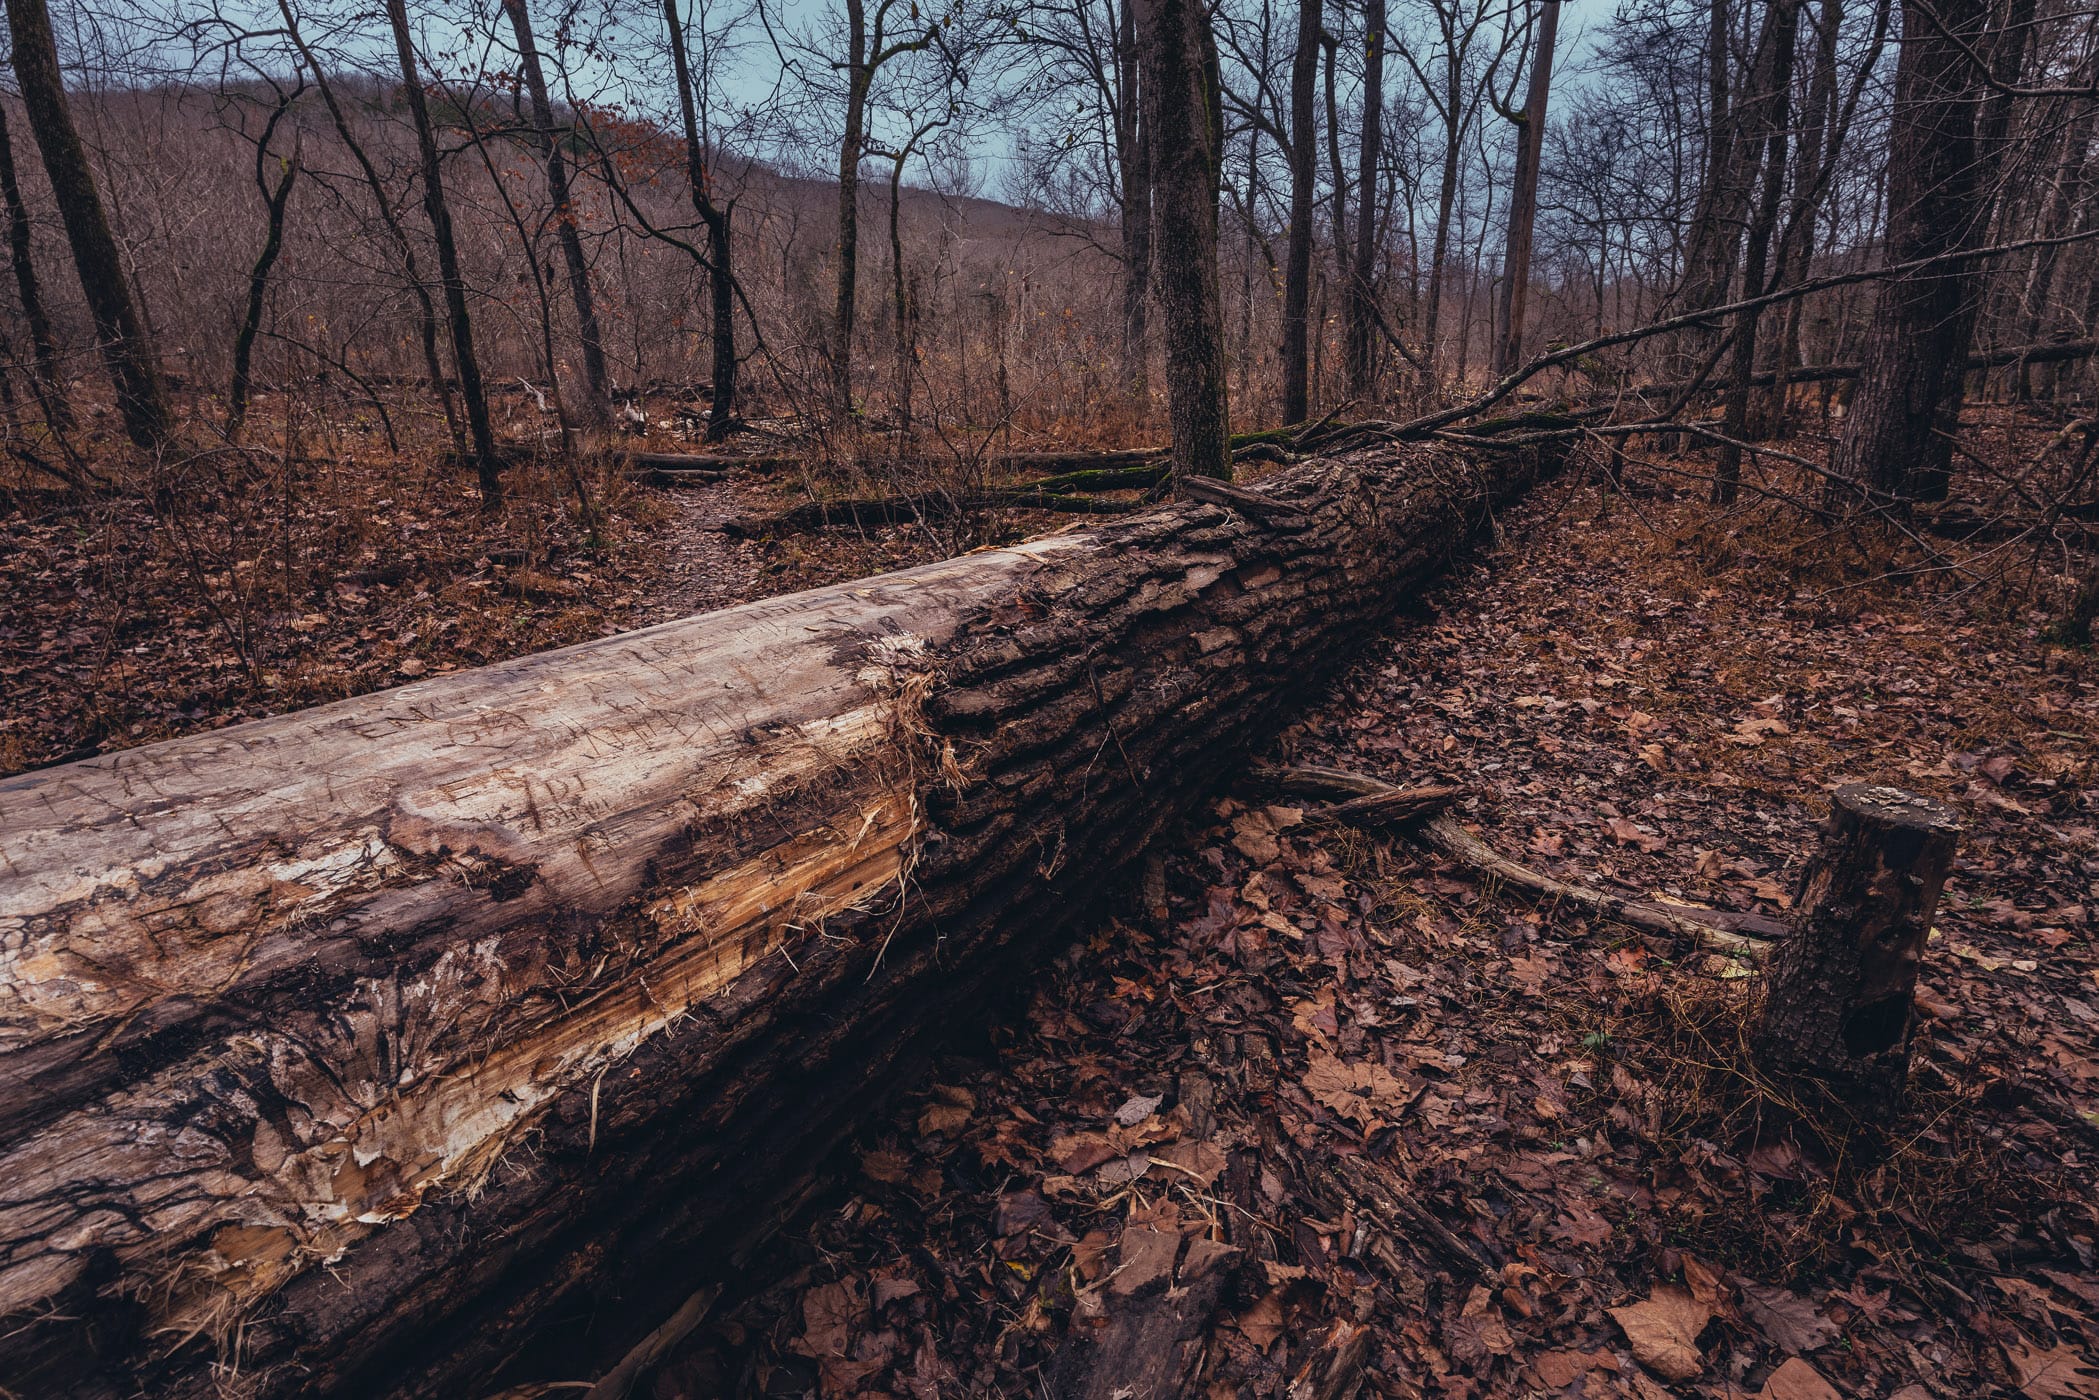 A fallen tree lies in the forest at Arkansas' Devil's Den State Park.